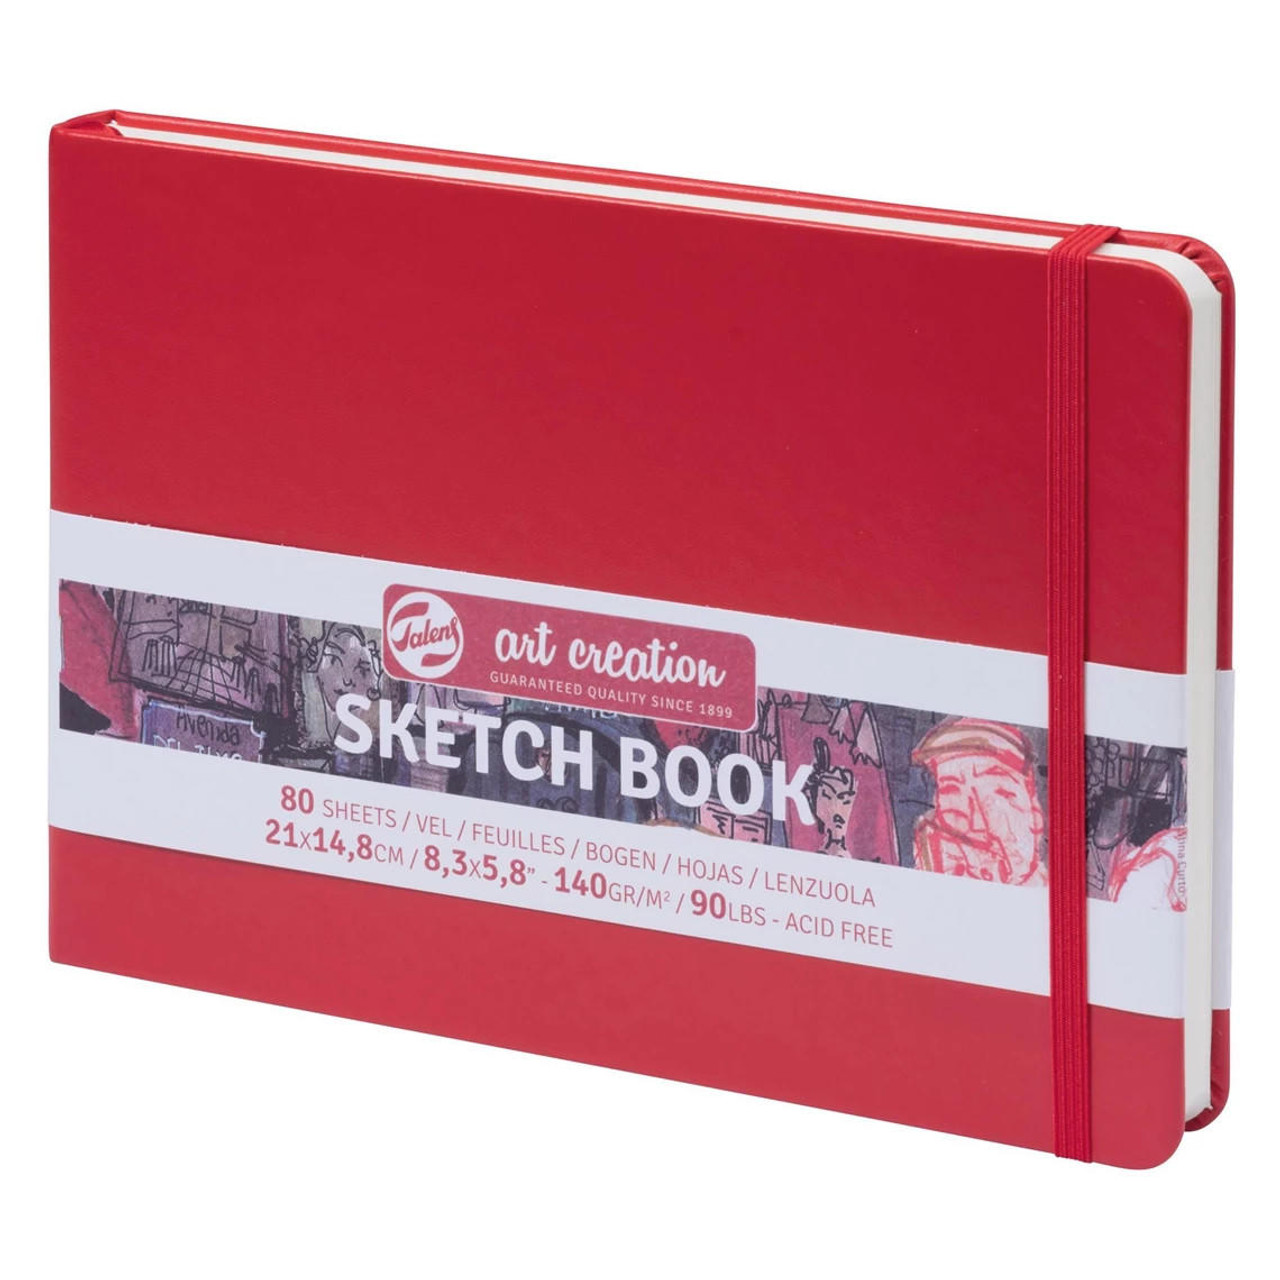 The Fine Touch & Fabriano sketchbooks